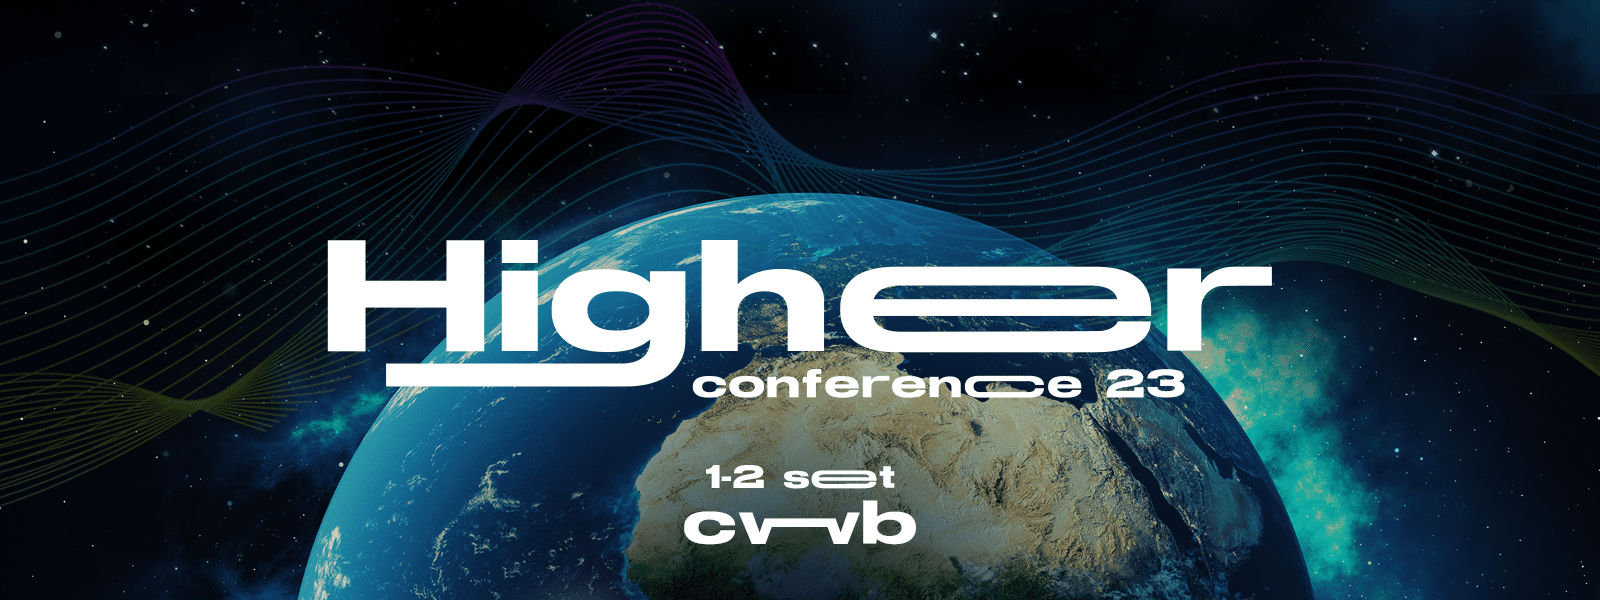 HIGHER CONFERENCE 23